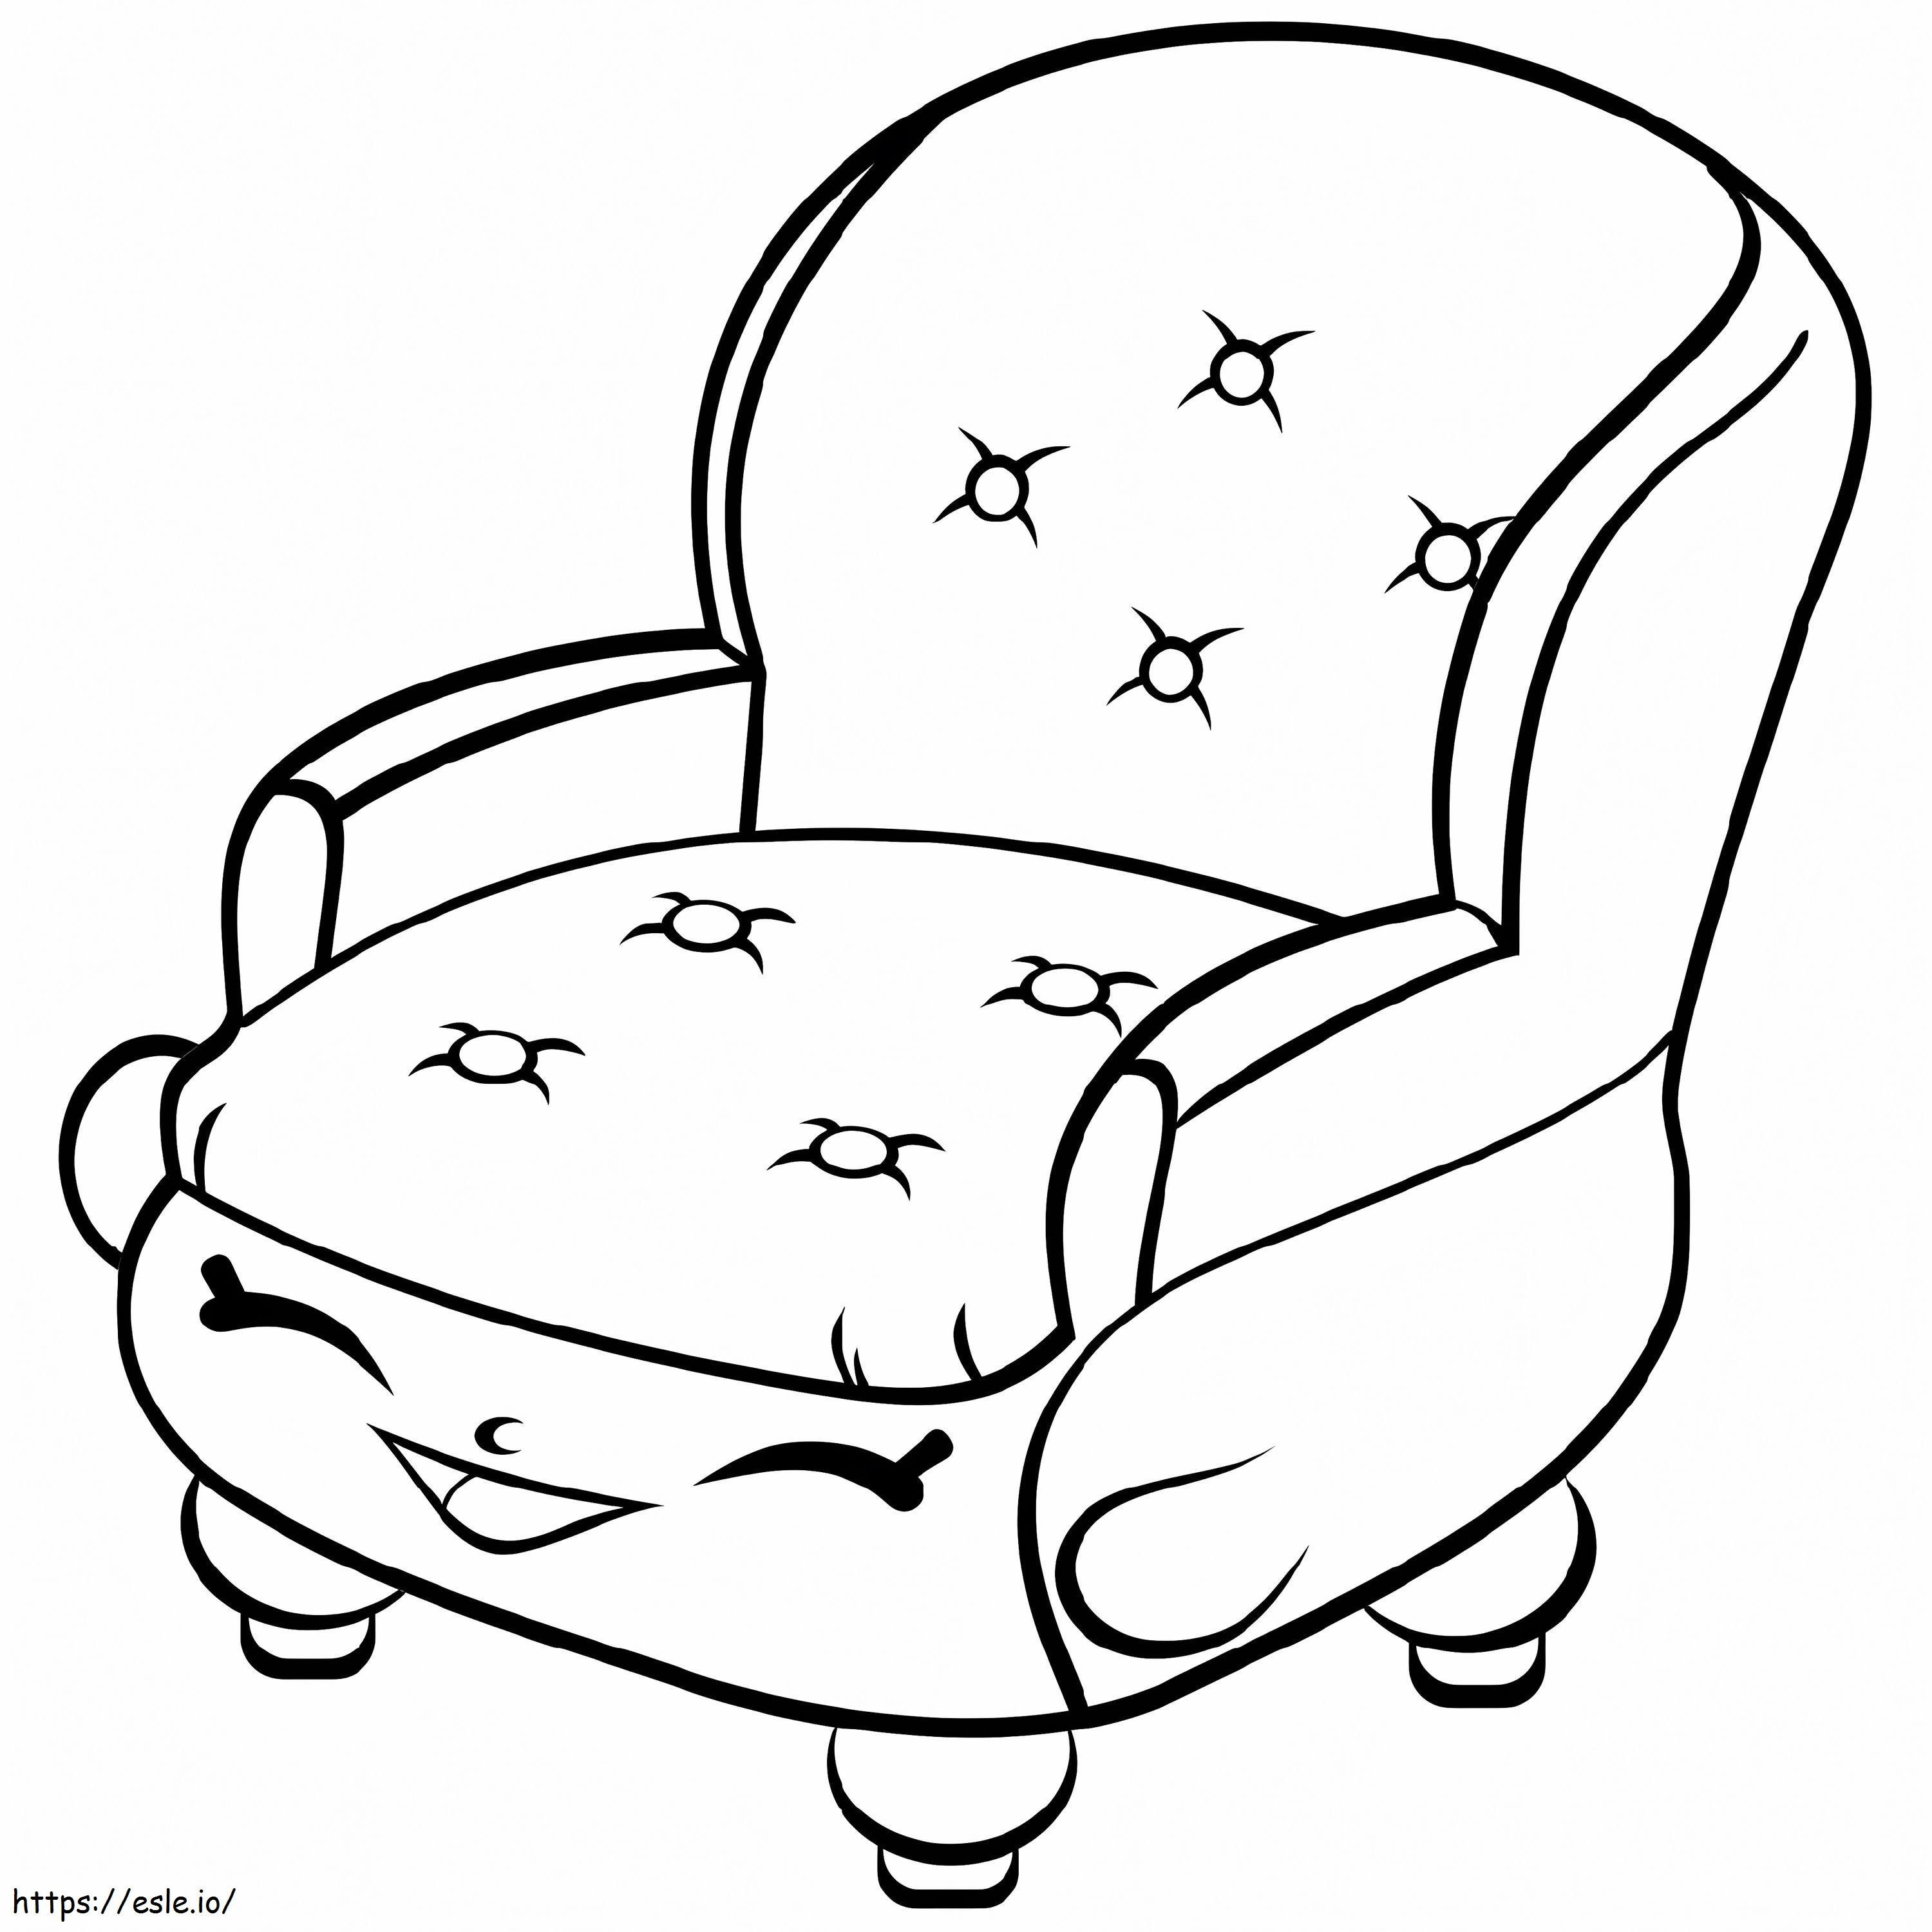 Comfy Chair Shopkin coloring page